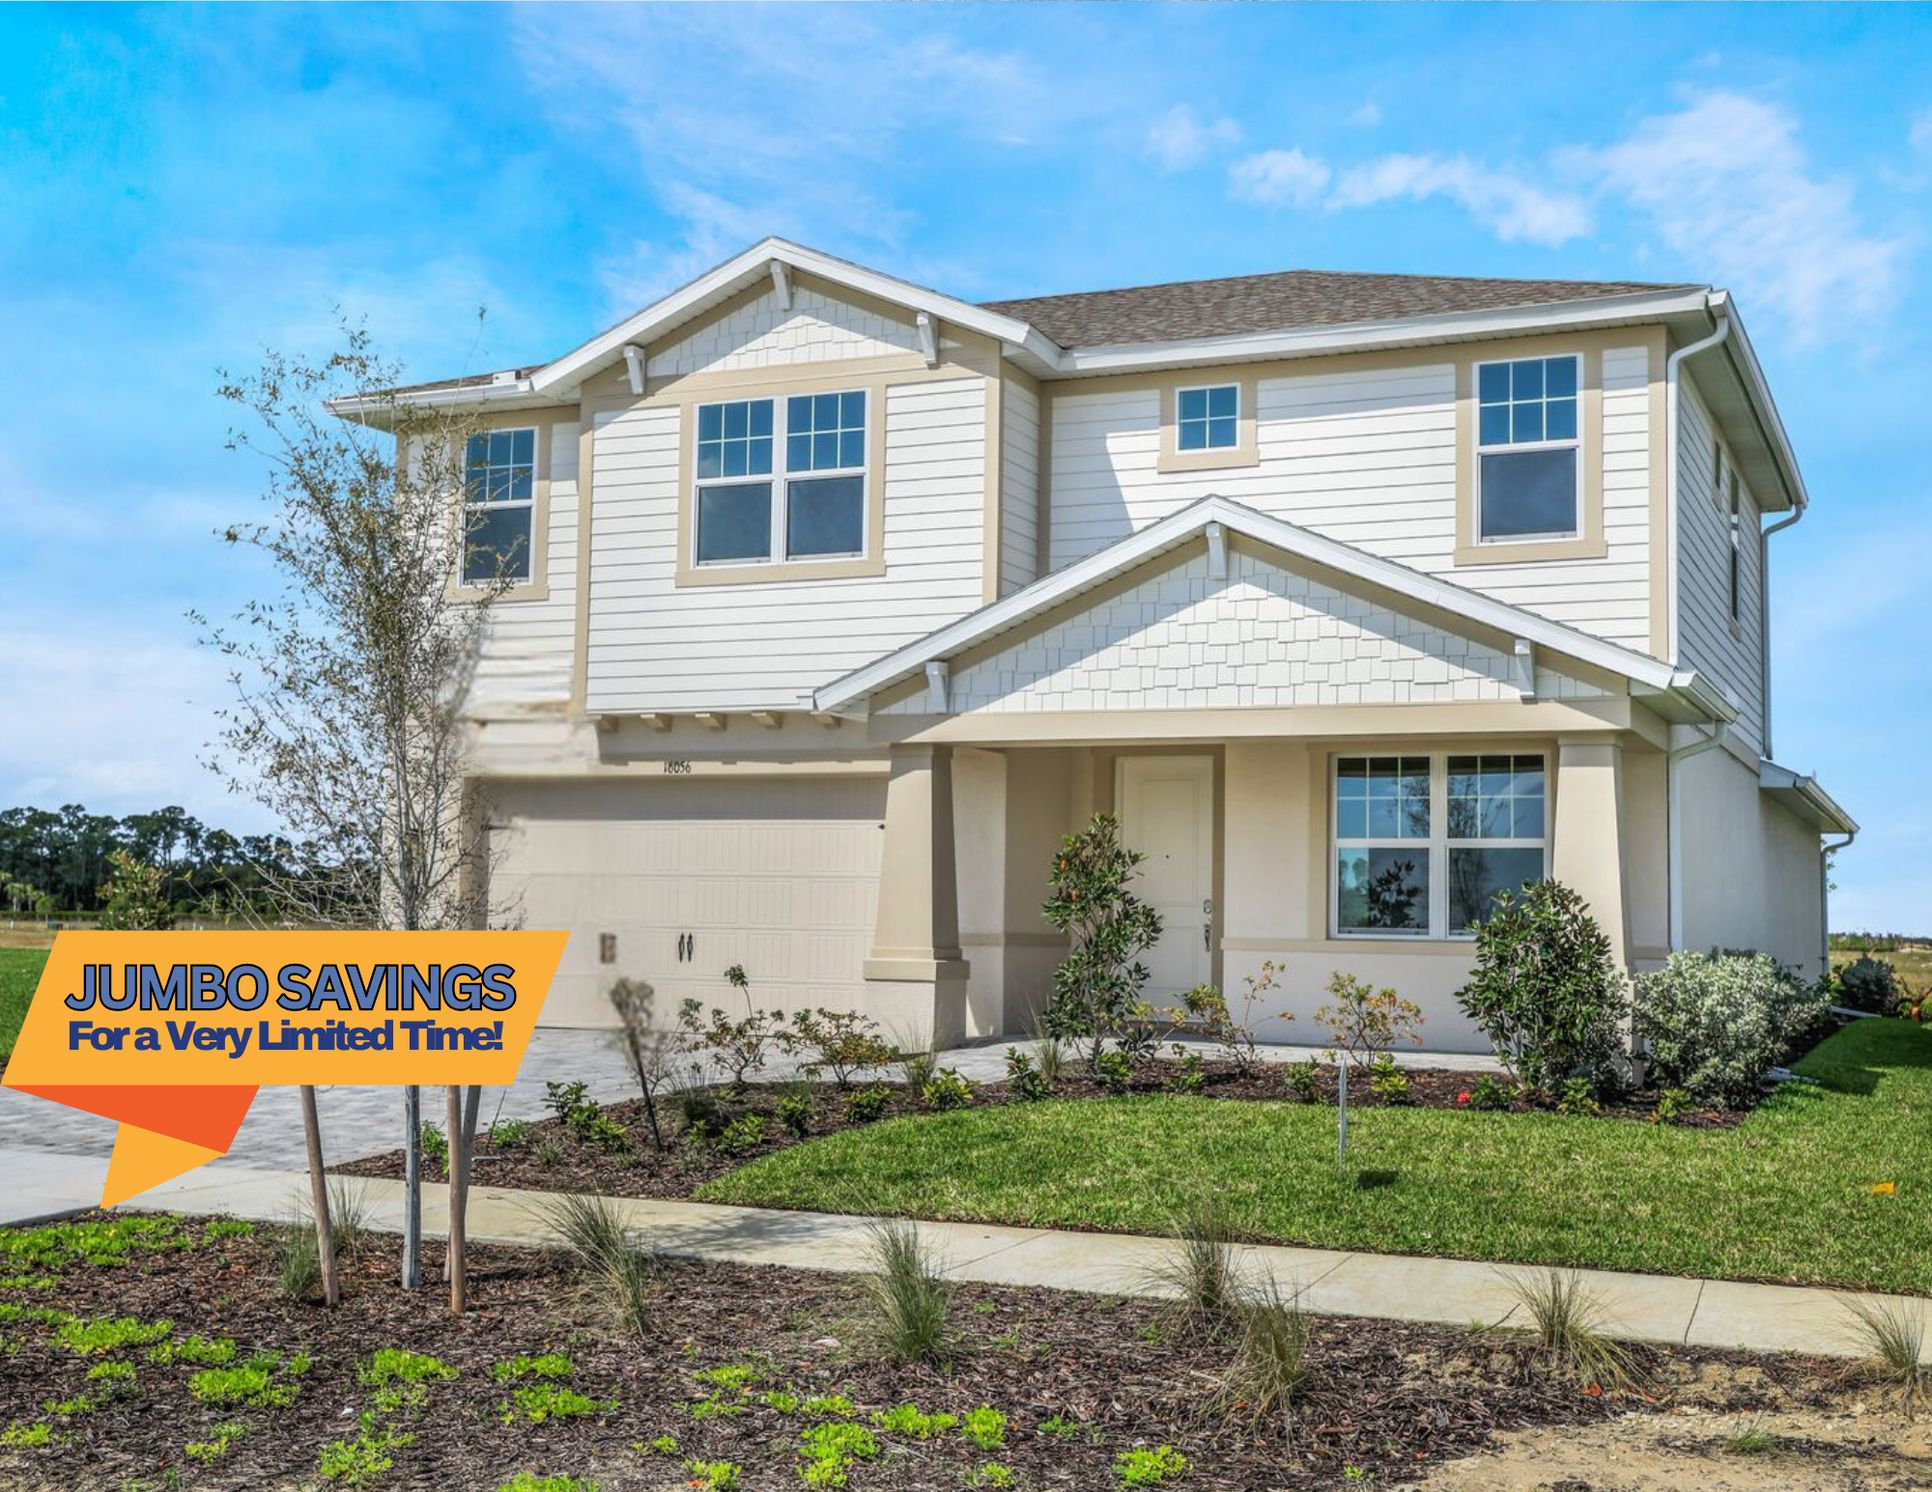 Quick Move-In Home - Sandalwood Floor Plan:Sandalwood Floor Plan- New Home For Sale - Move-In Ready at The Sanctuary at Babcock Ranch Punta Gorda by William Ryan Homes